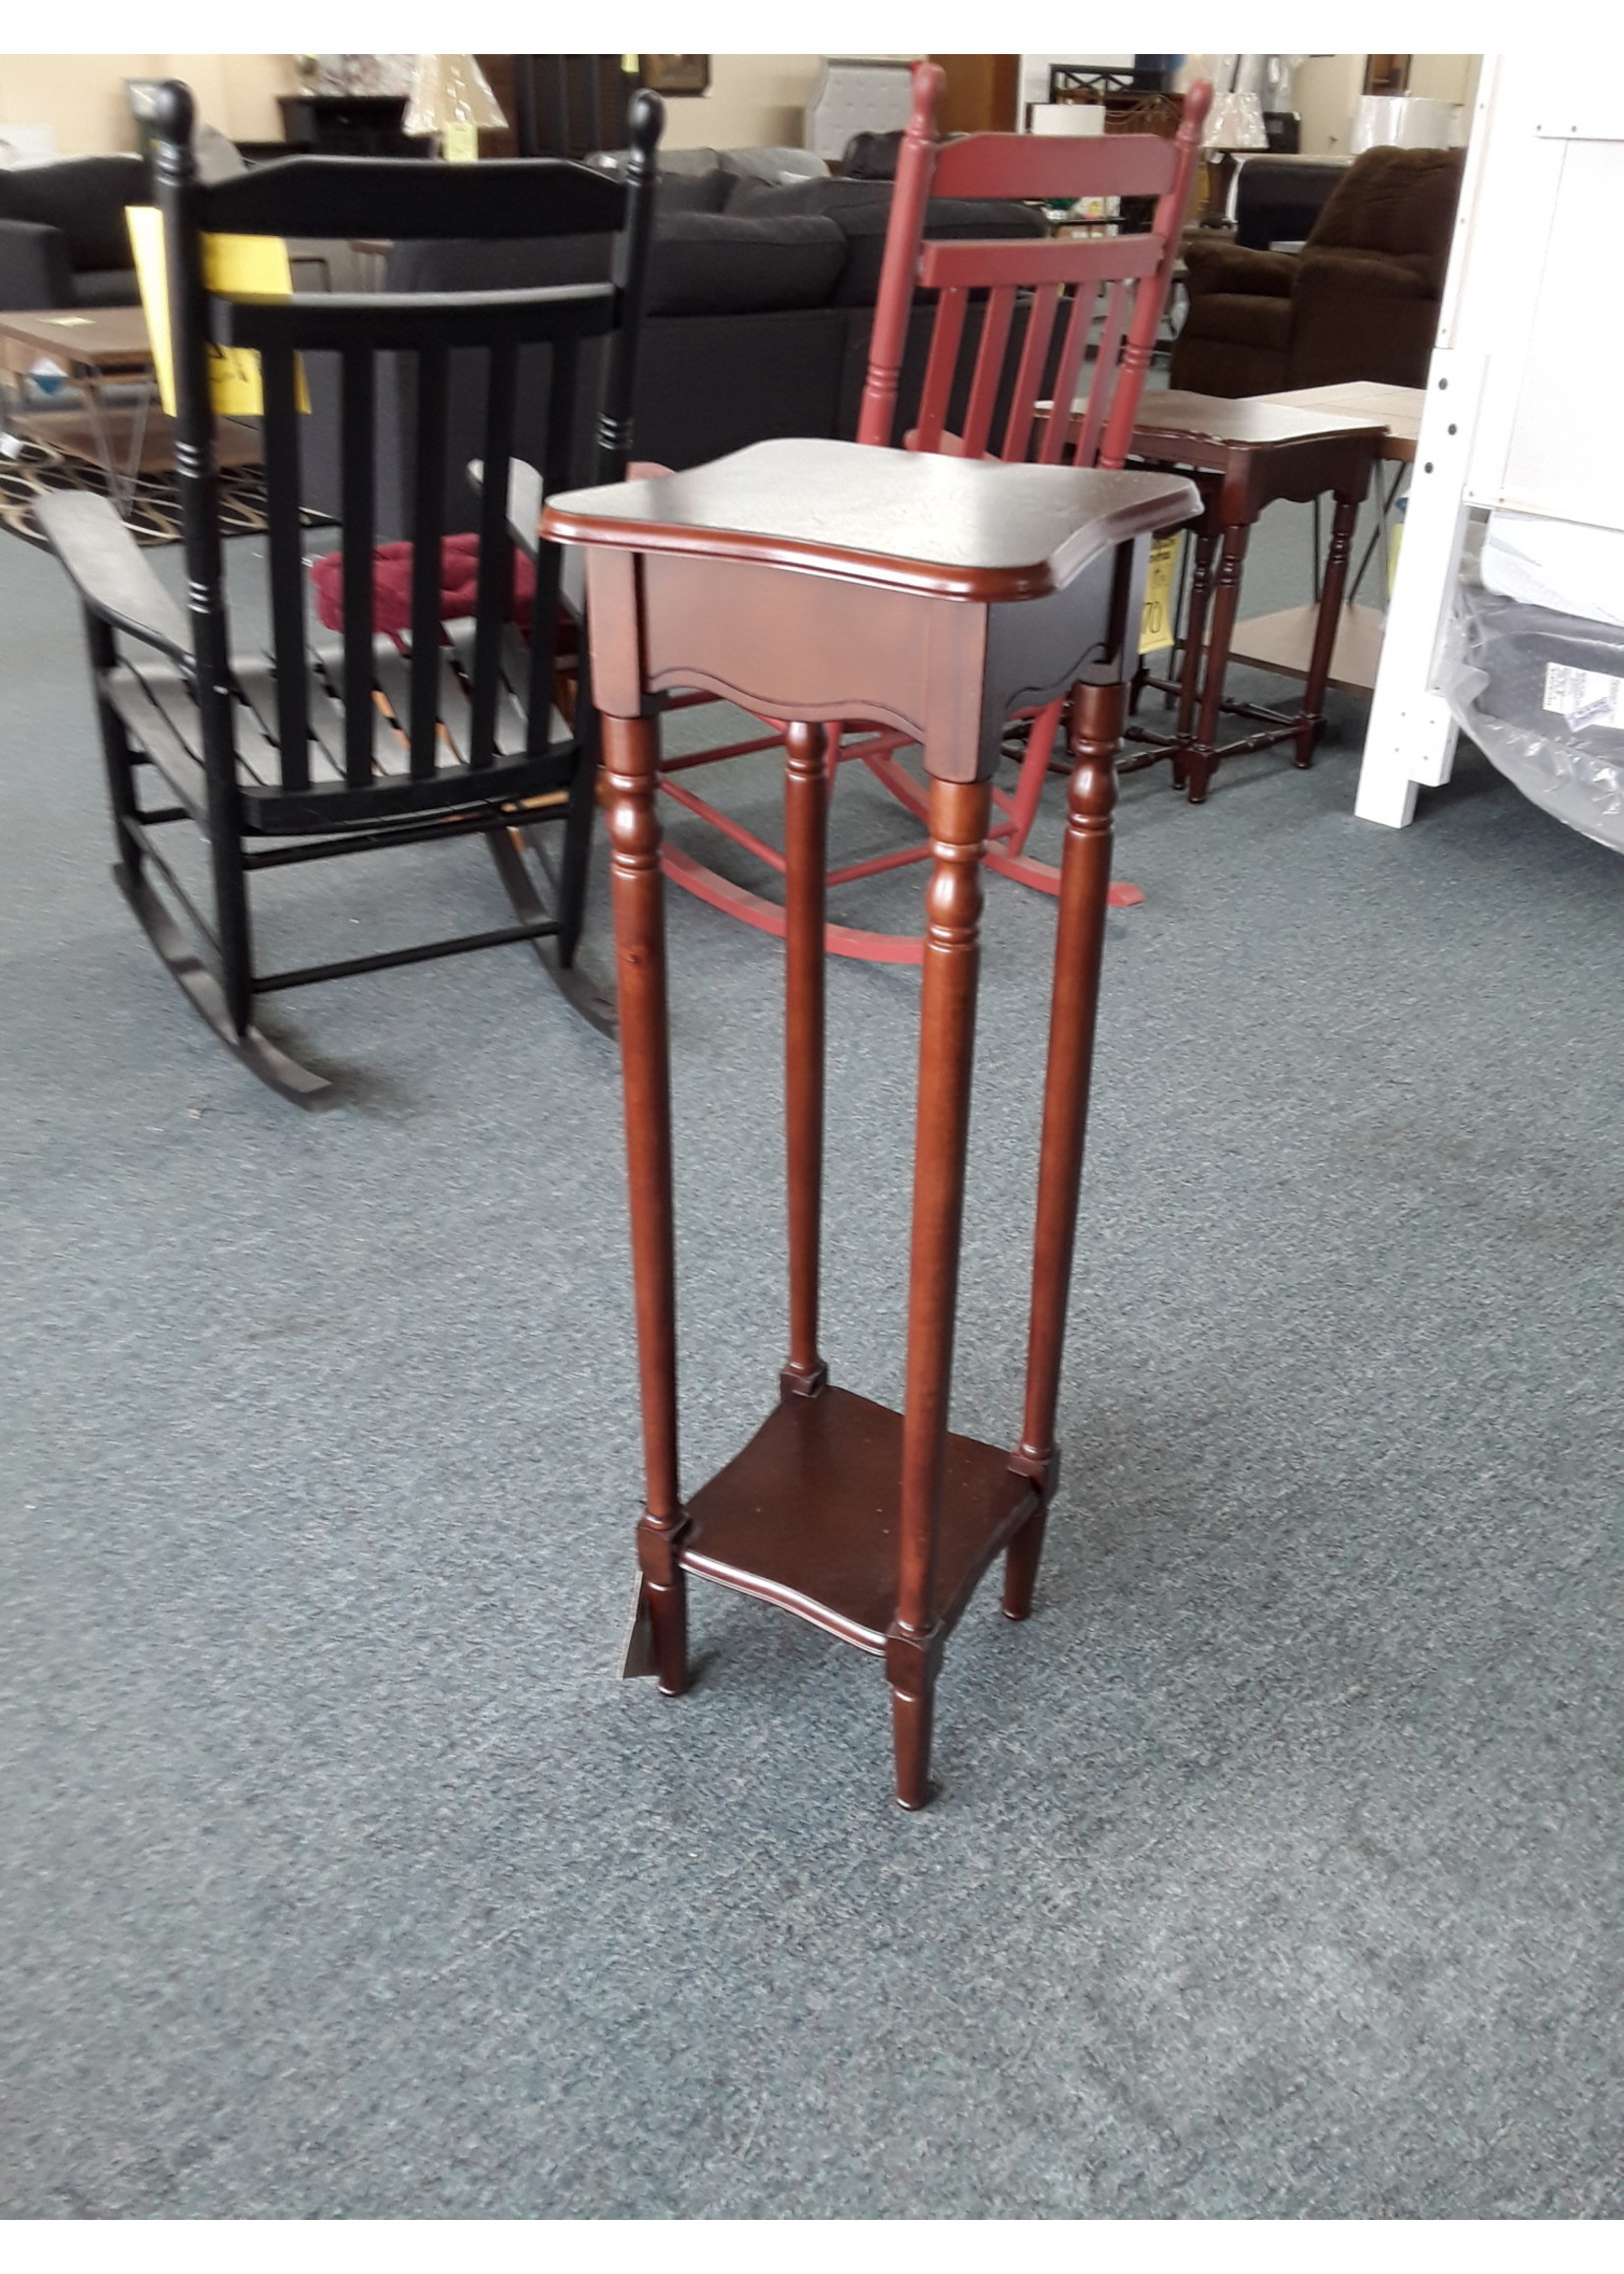 POWELL 716-267A PLANT STAND BROWN CHERRY